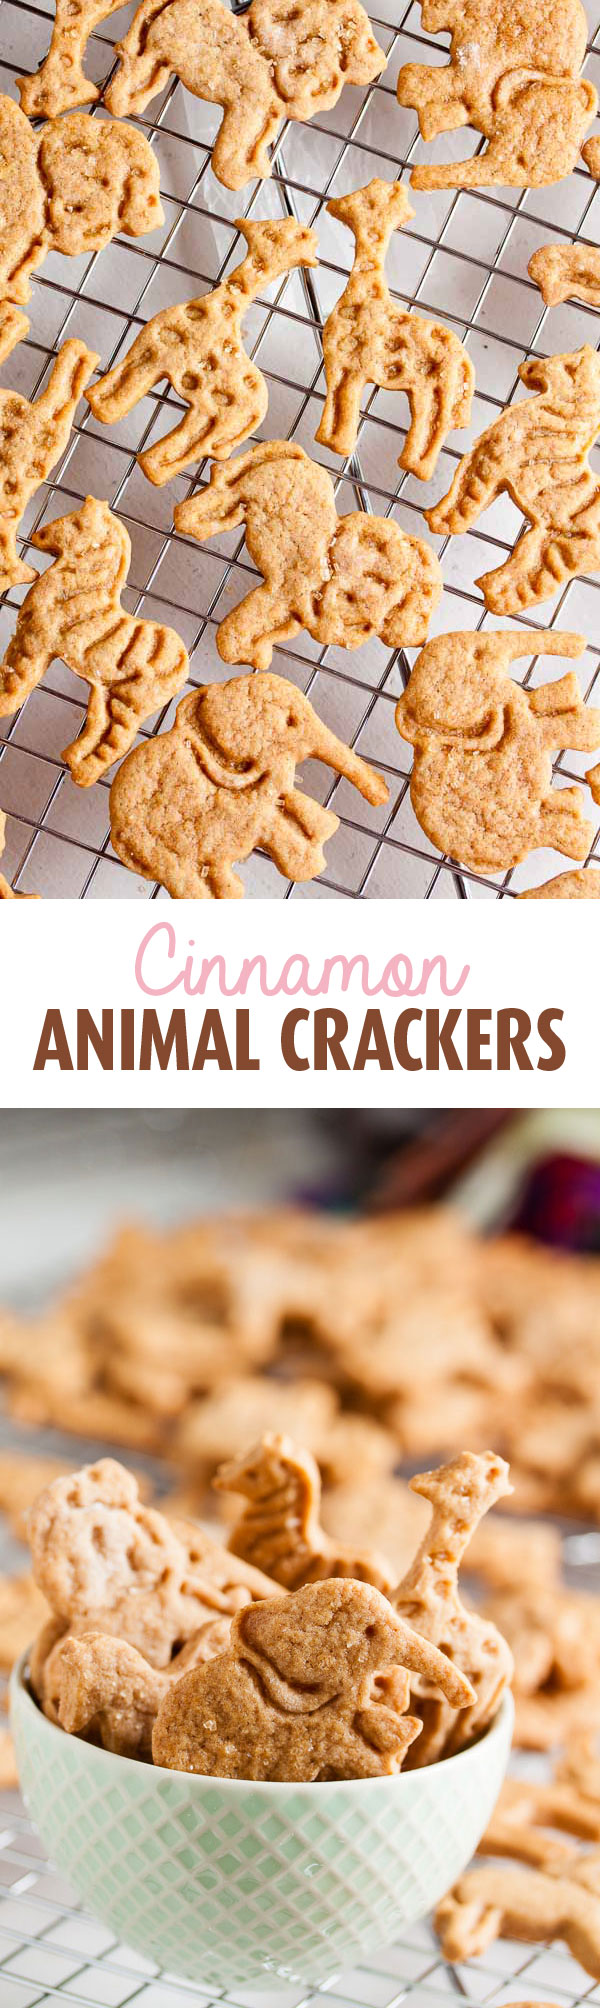 Both cinnamon and honey combine to give these soft, tender cinnamon animal crackers a flavour reminiscent of mini donuts or cinnamon buns.